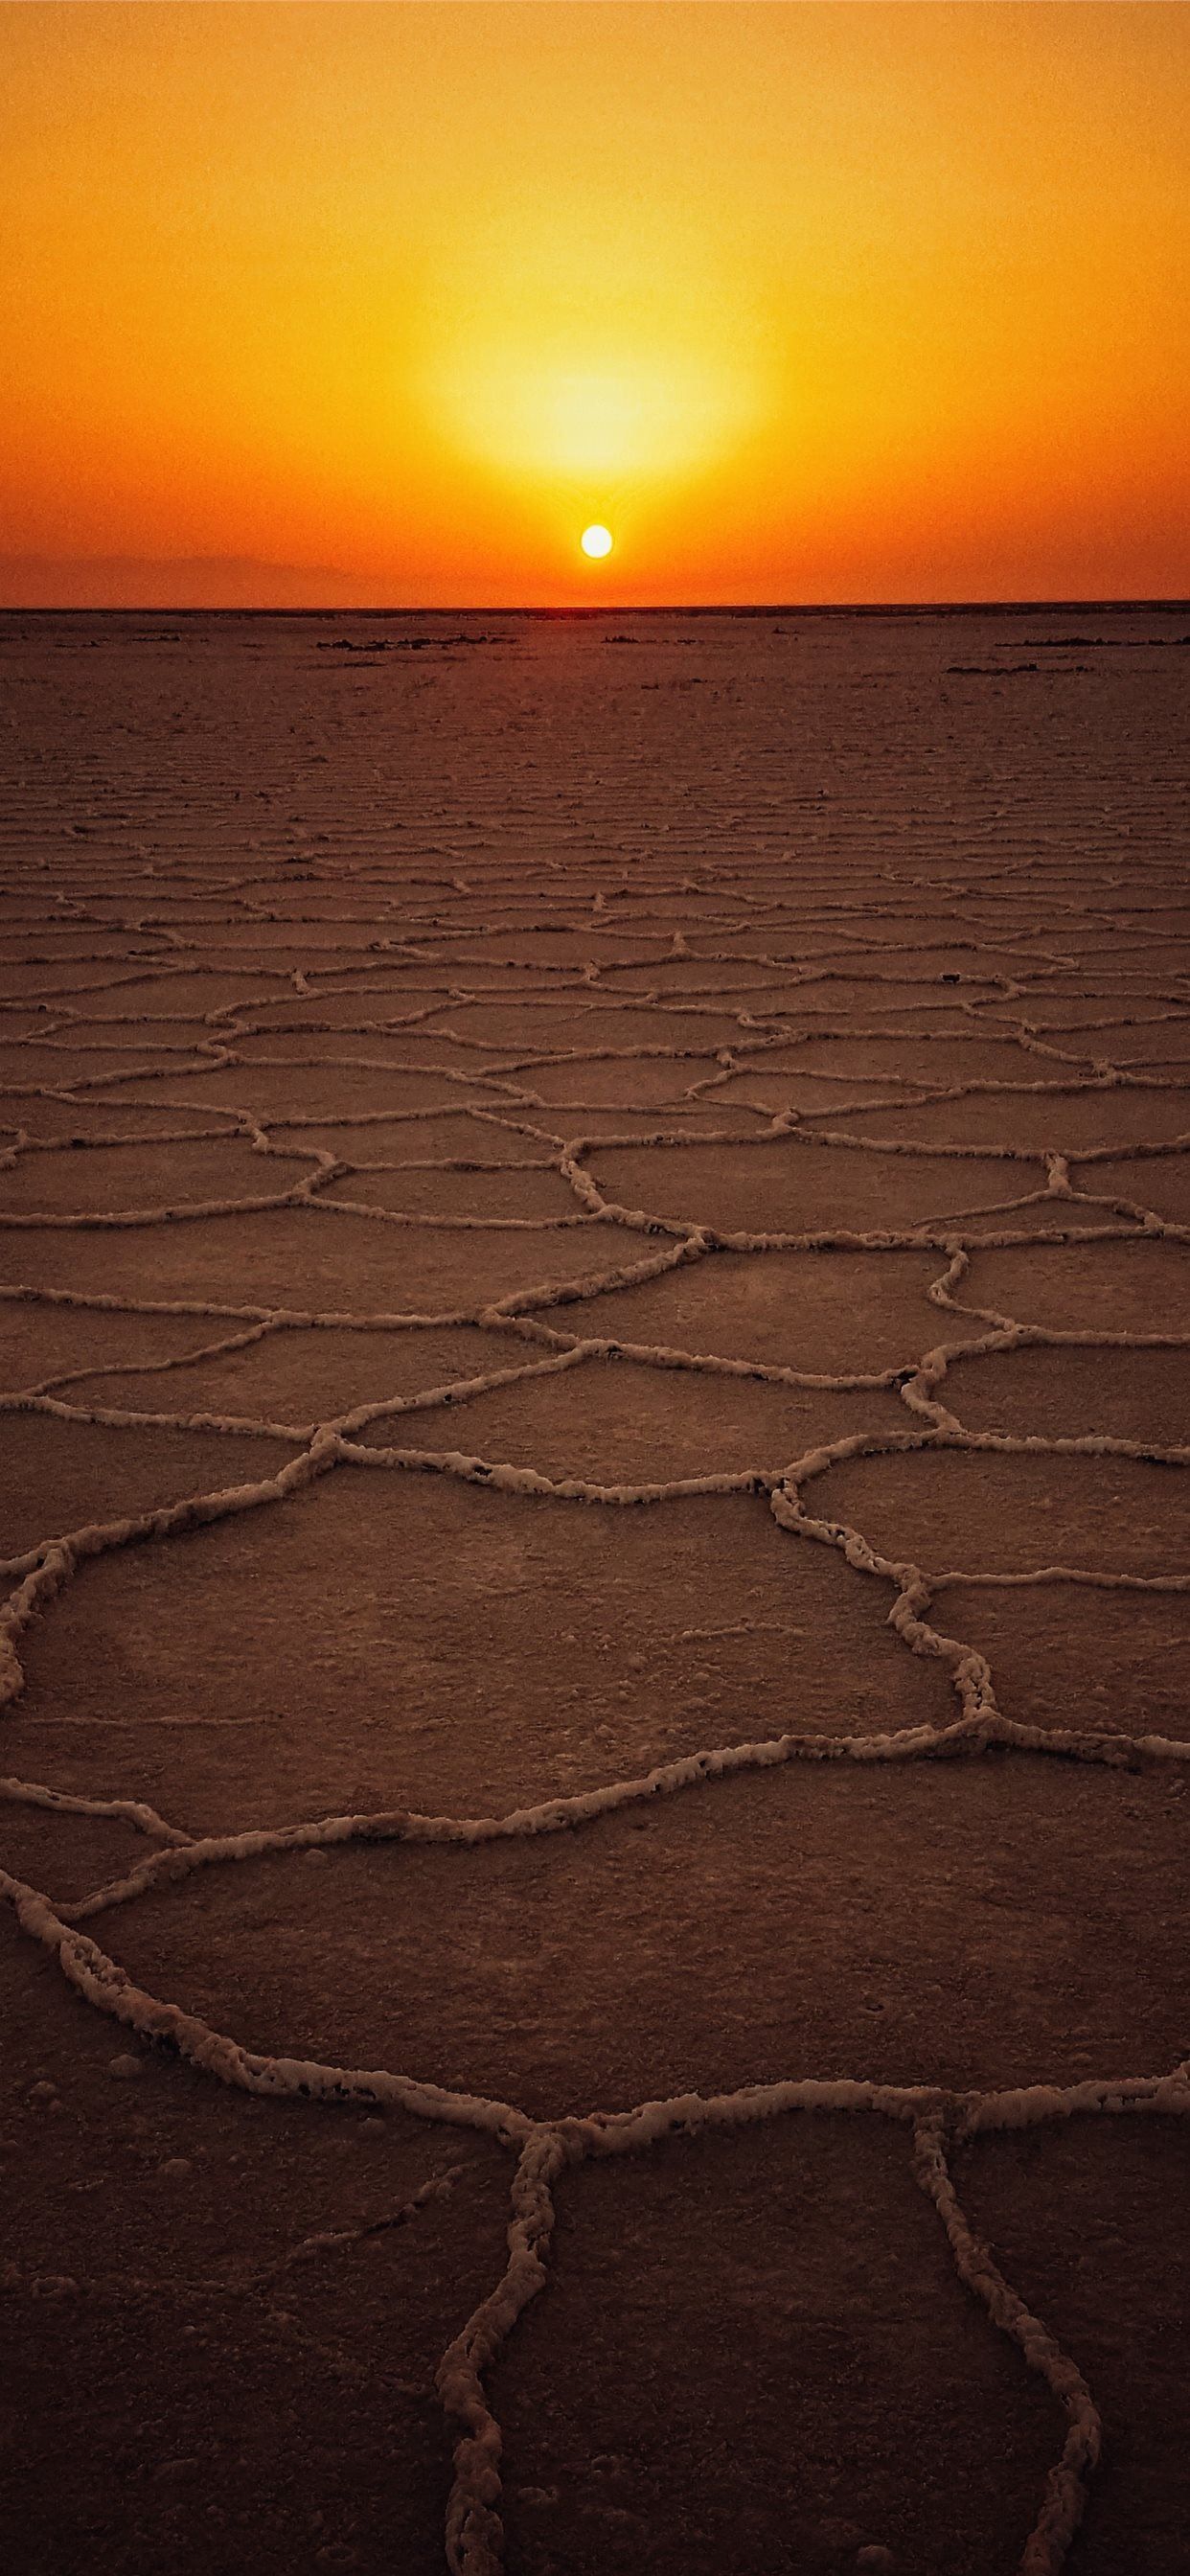 dried land at golden hour iPhone X Wallpaper Free Download